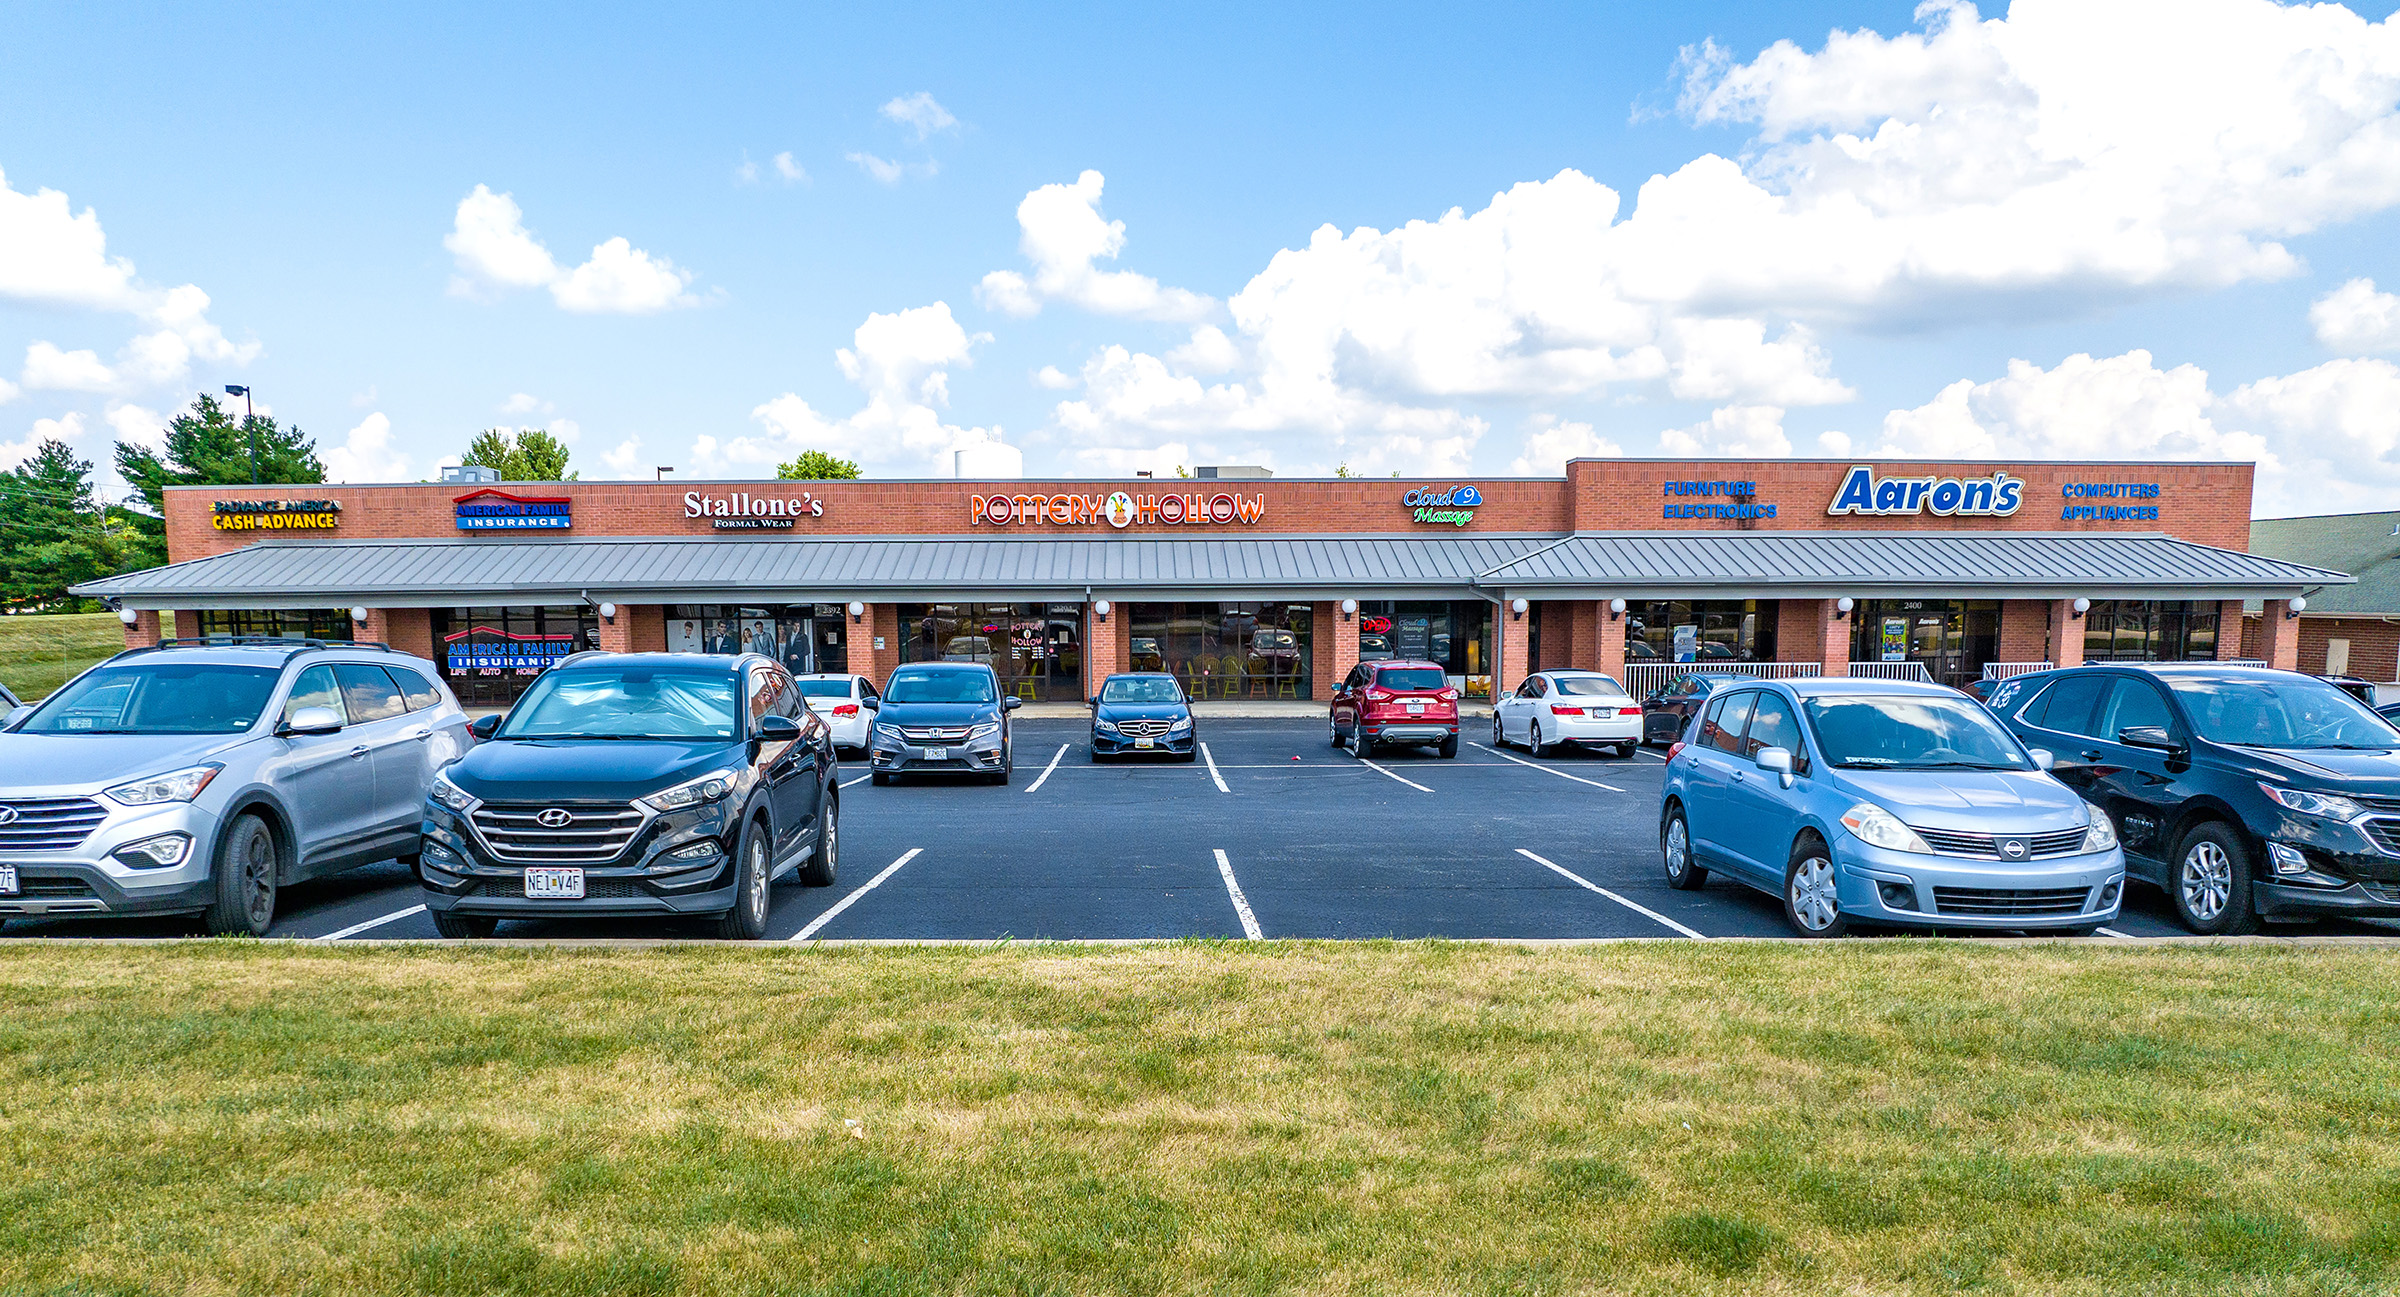 Hanley Investment Group Arranges Sale of 20,400 SF Multi-Tenant Retail Property in St. Louis Metro